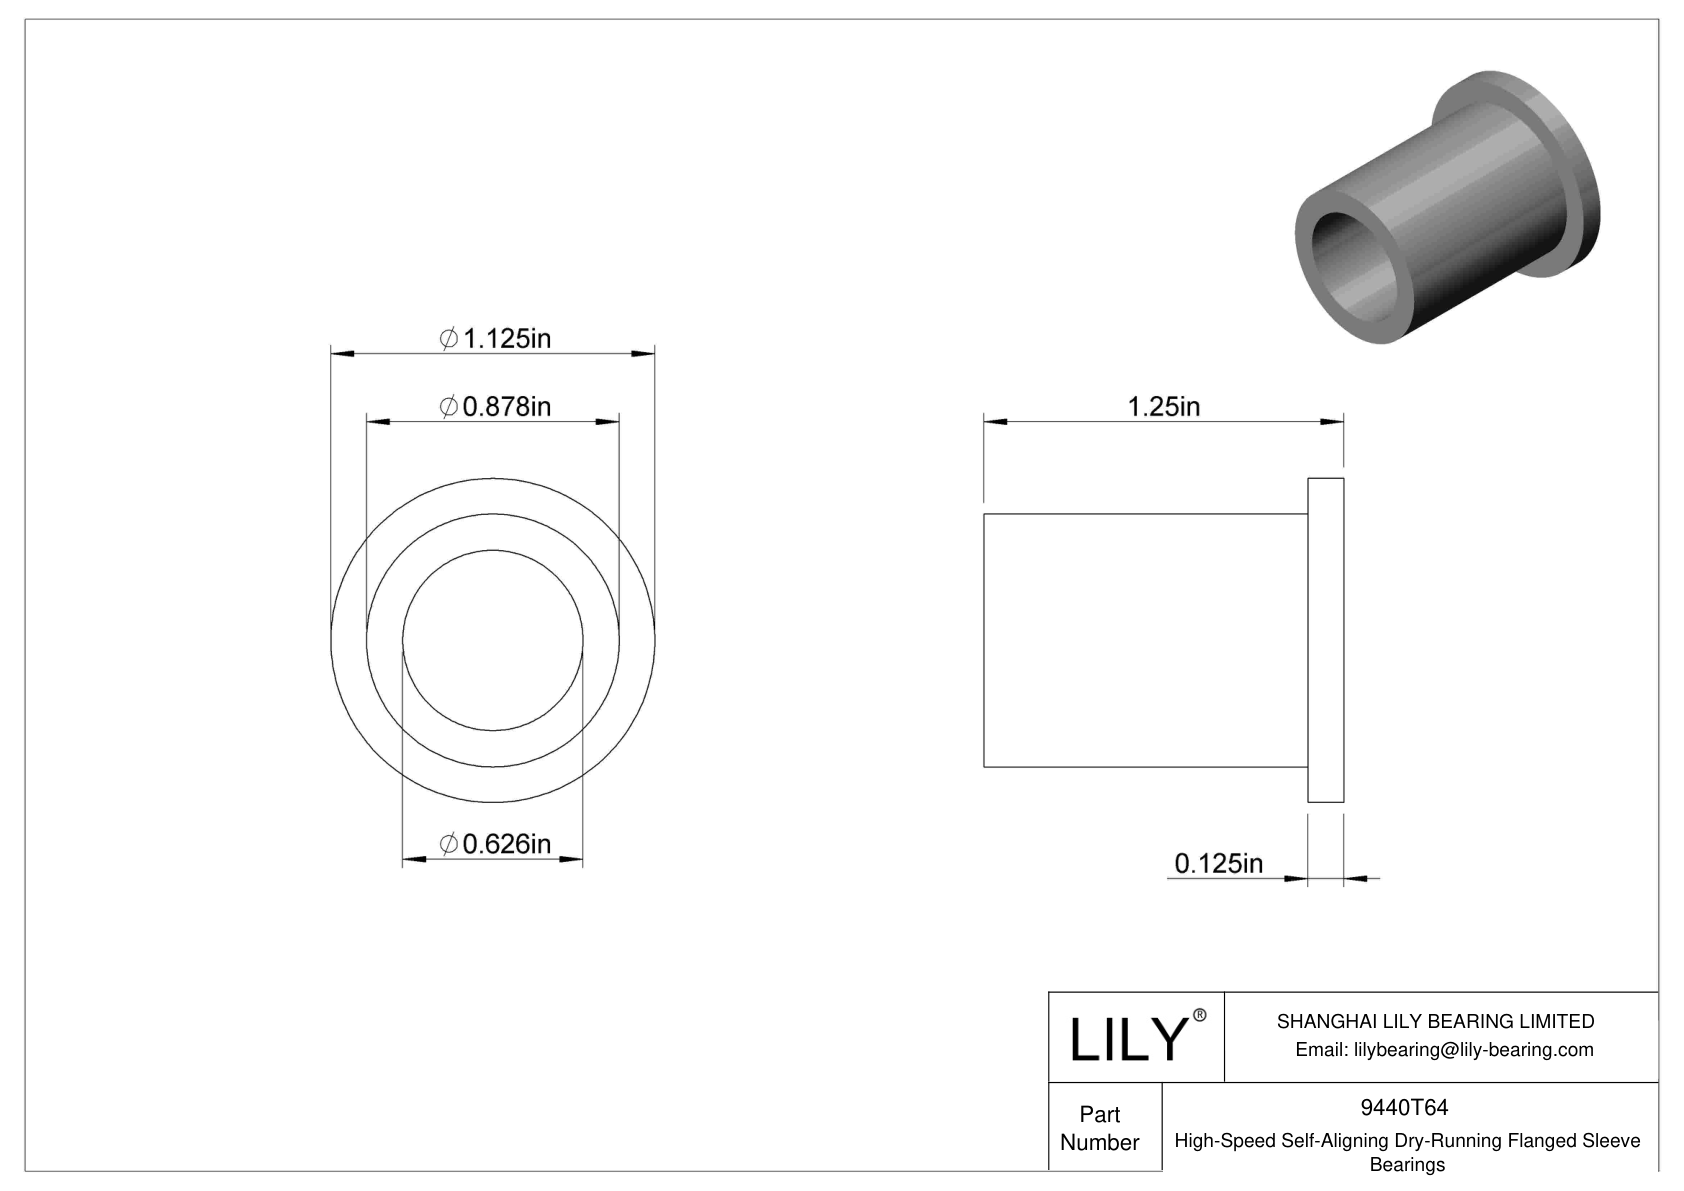 JEEATGE High-Temperature Dry-Running Flanged Sleeve Bearings cad drawing